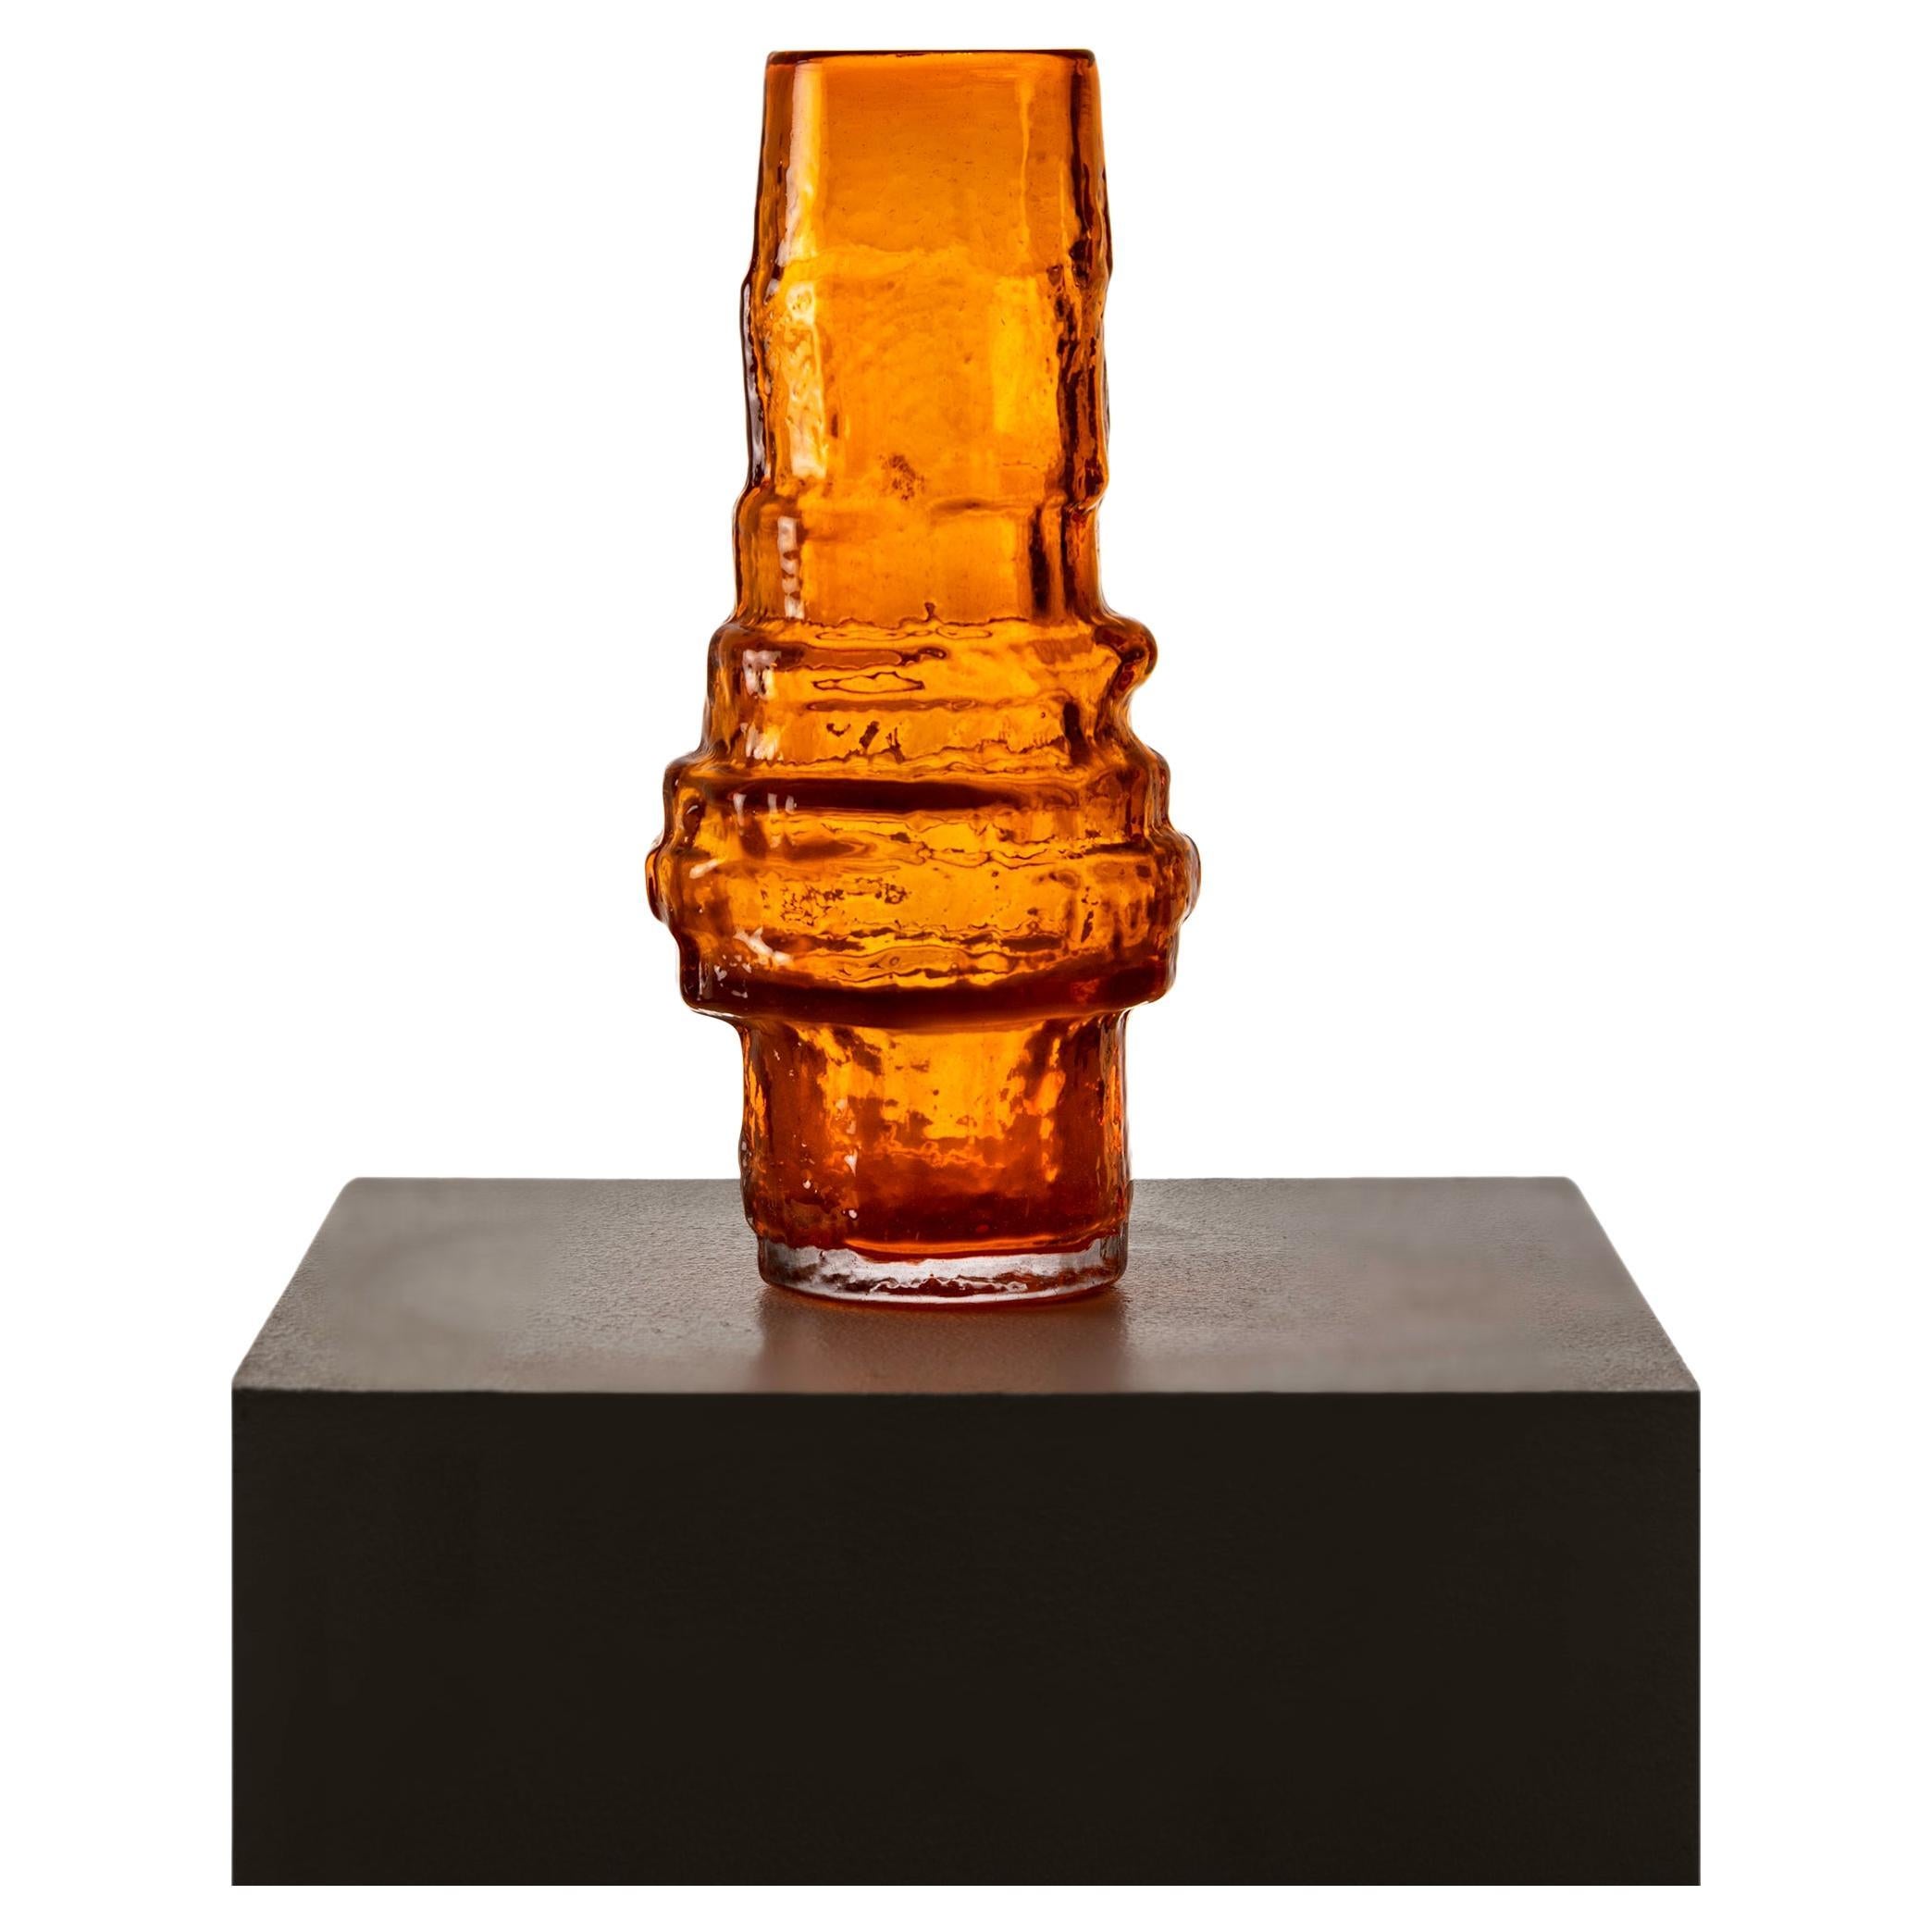 Textured Orange Glass Vase by Geoffrey Baxter for Whitefriars, 1960s For Sale